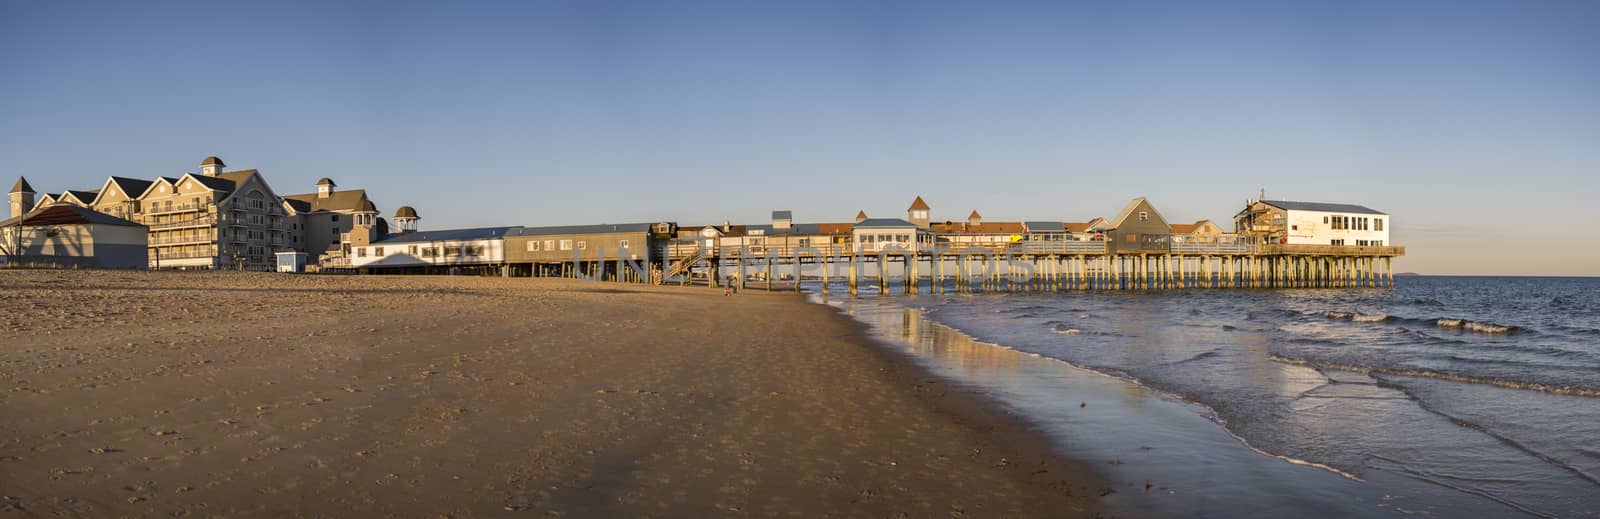 Pier in Old Orchard Beach, Maine. by edella